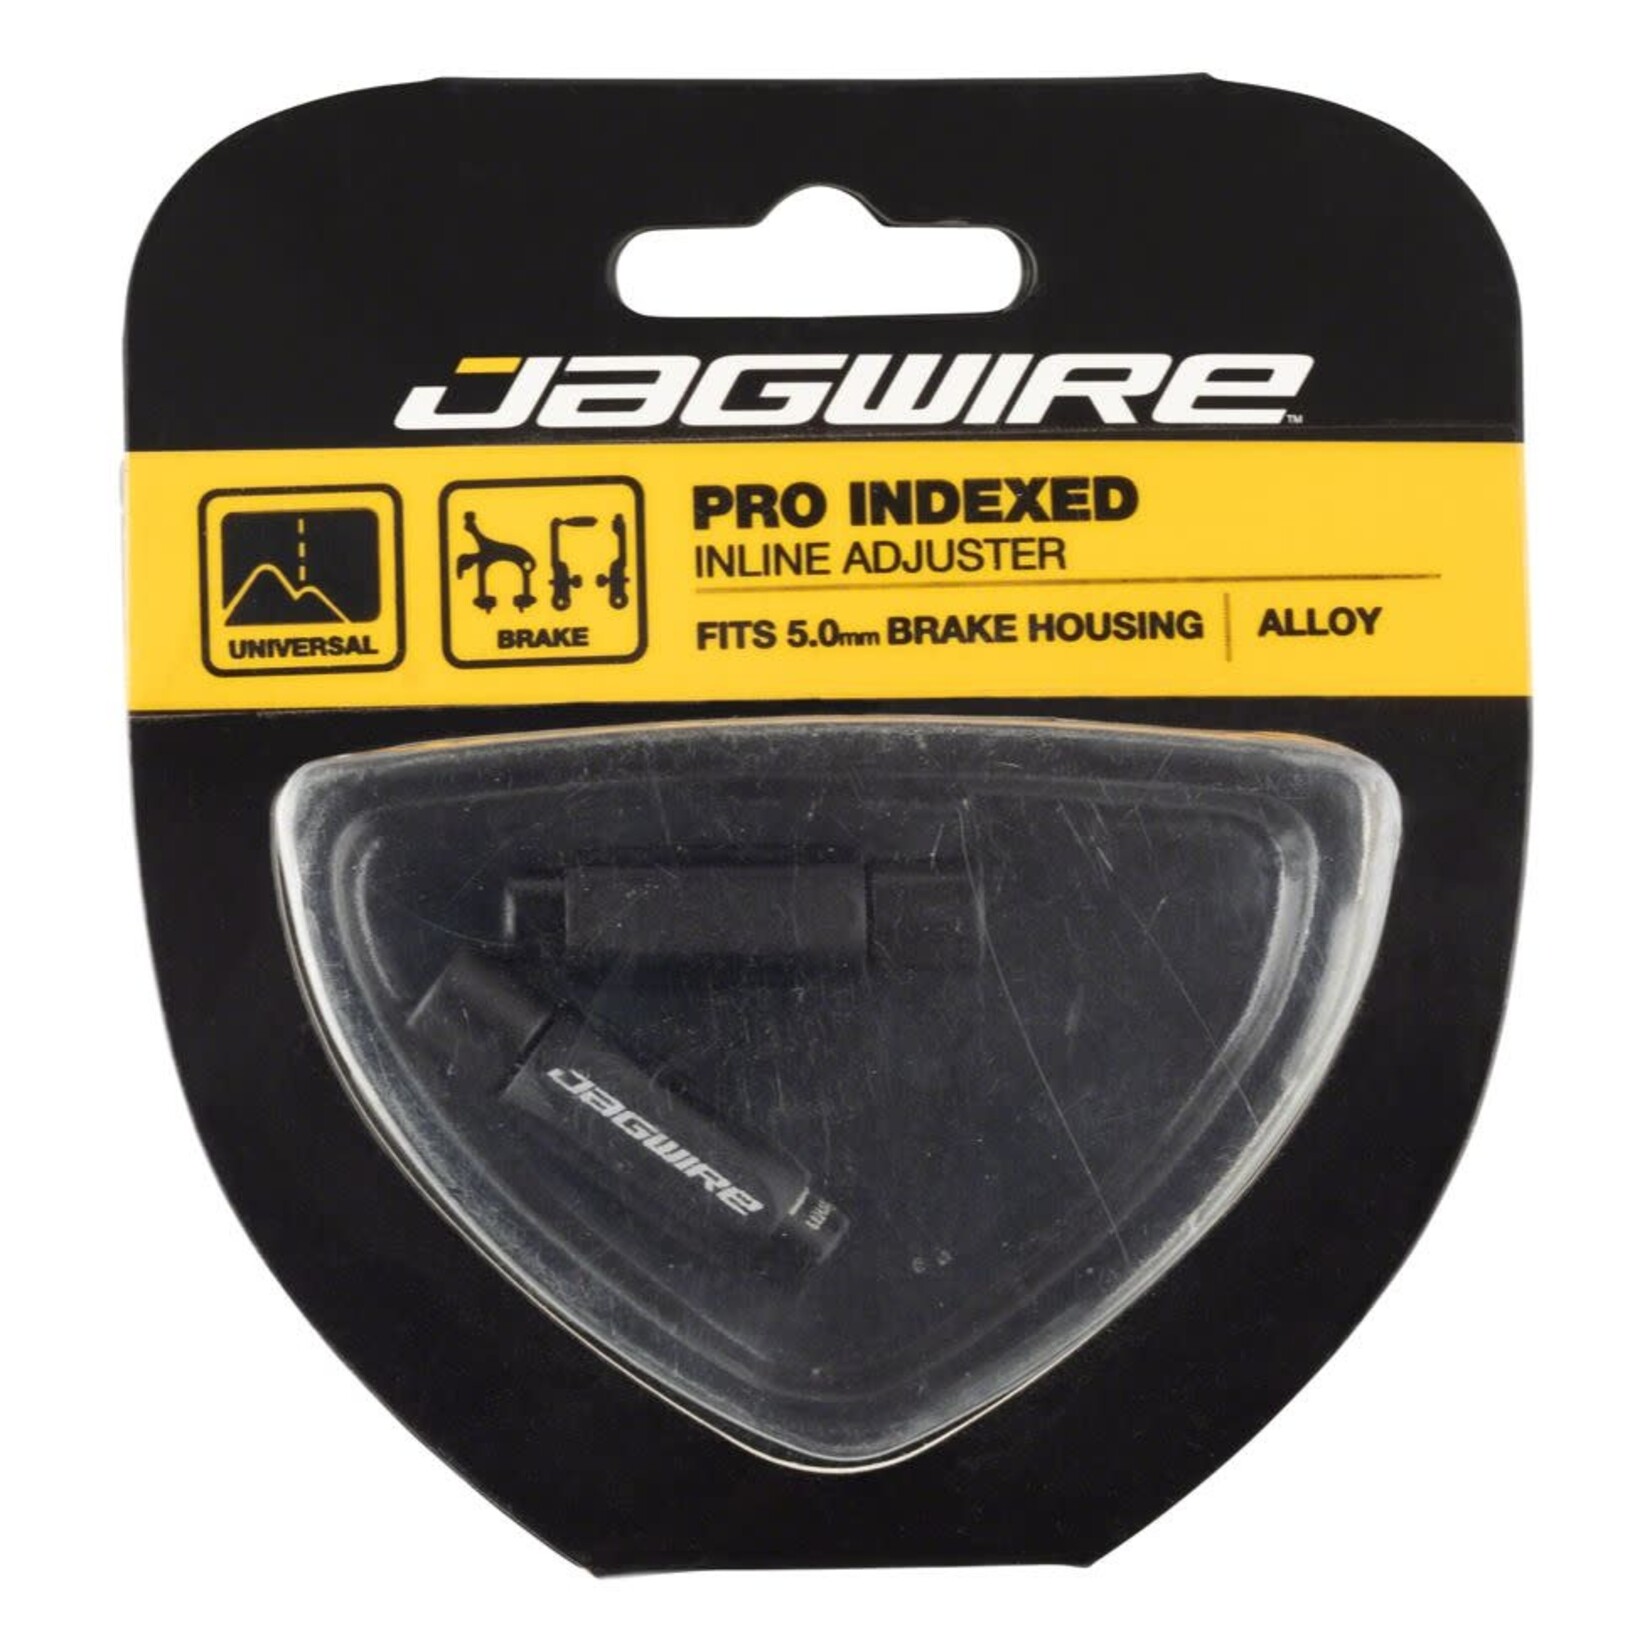 Jagwire Jagwire Pro Indexed Inline Adjuster, Fits 5.0mm Brake Housing, Alloy, Black, Pair